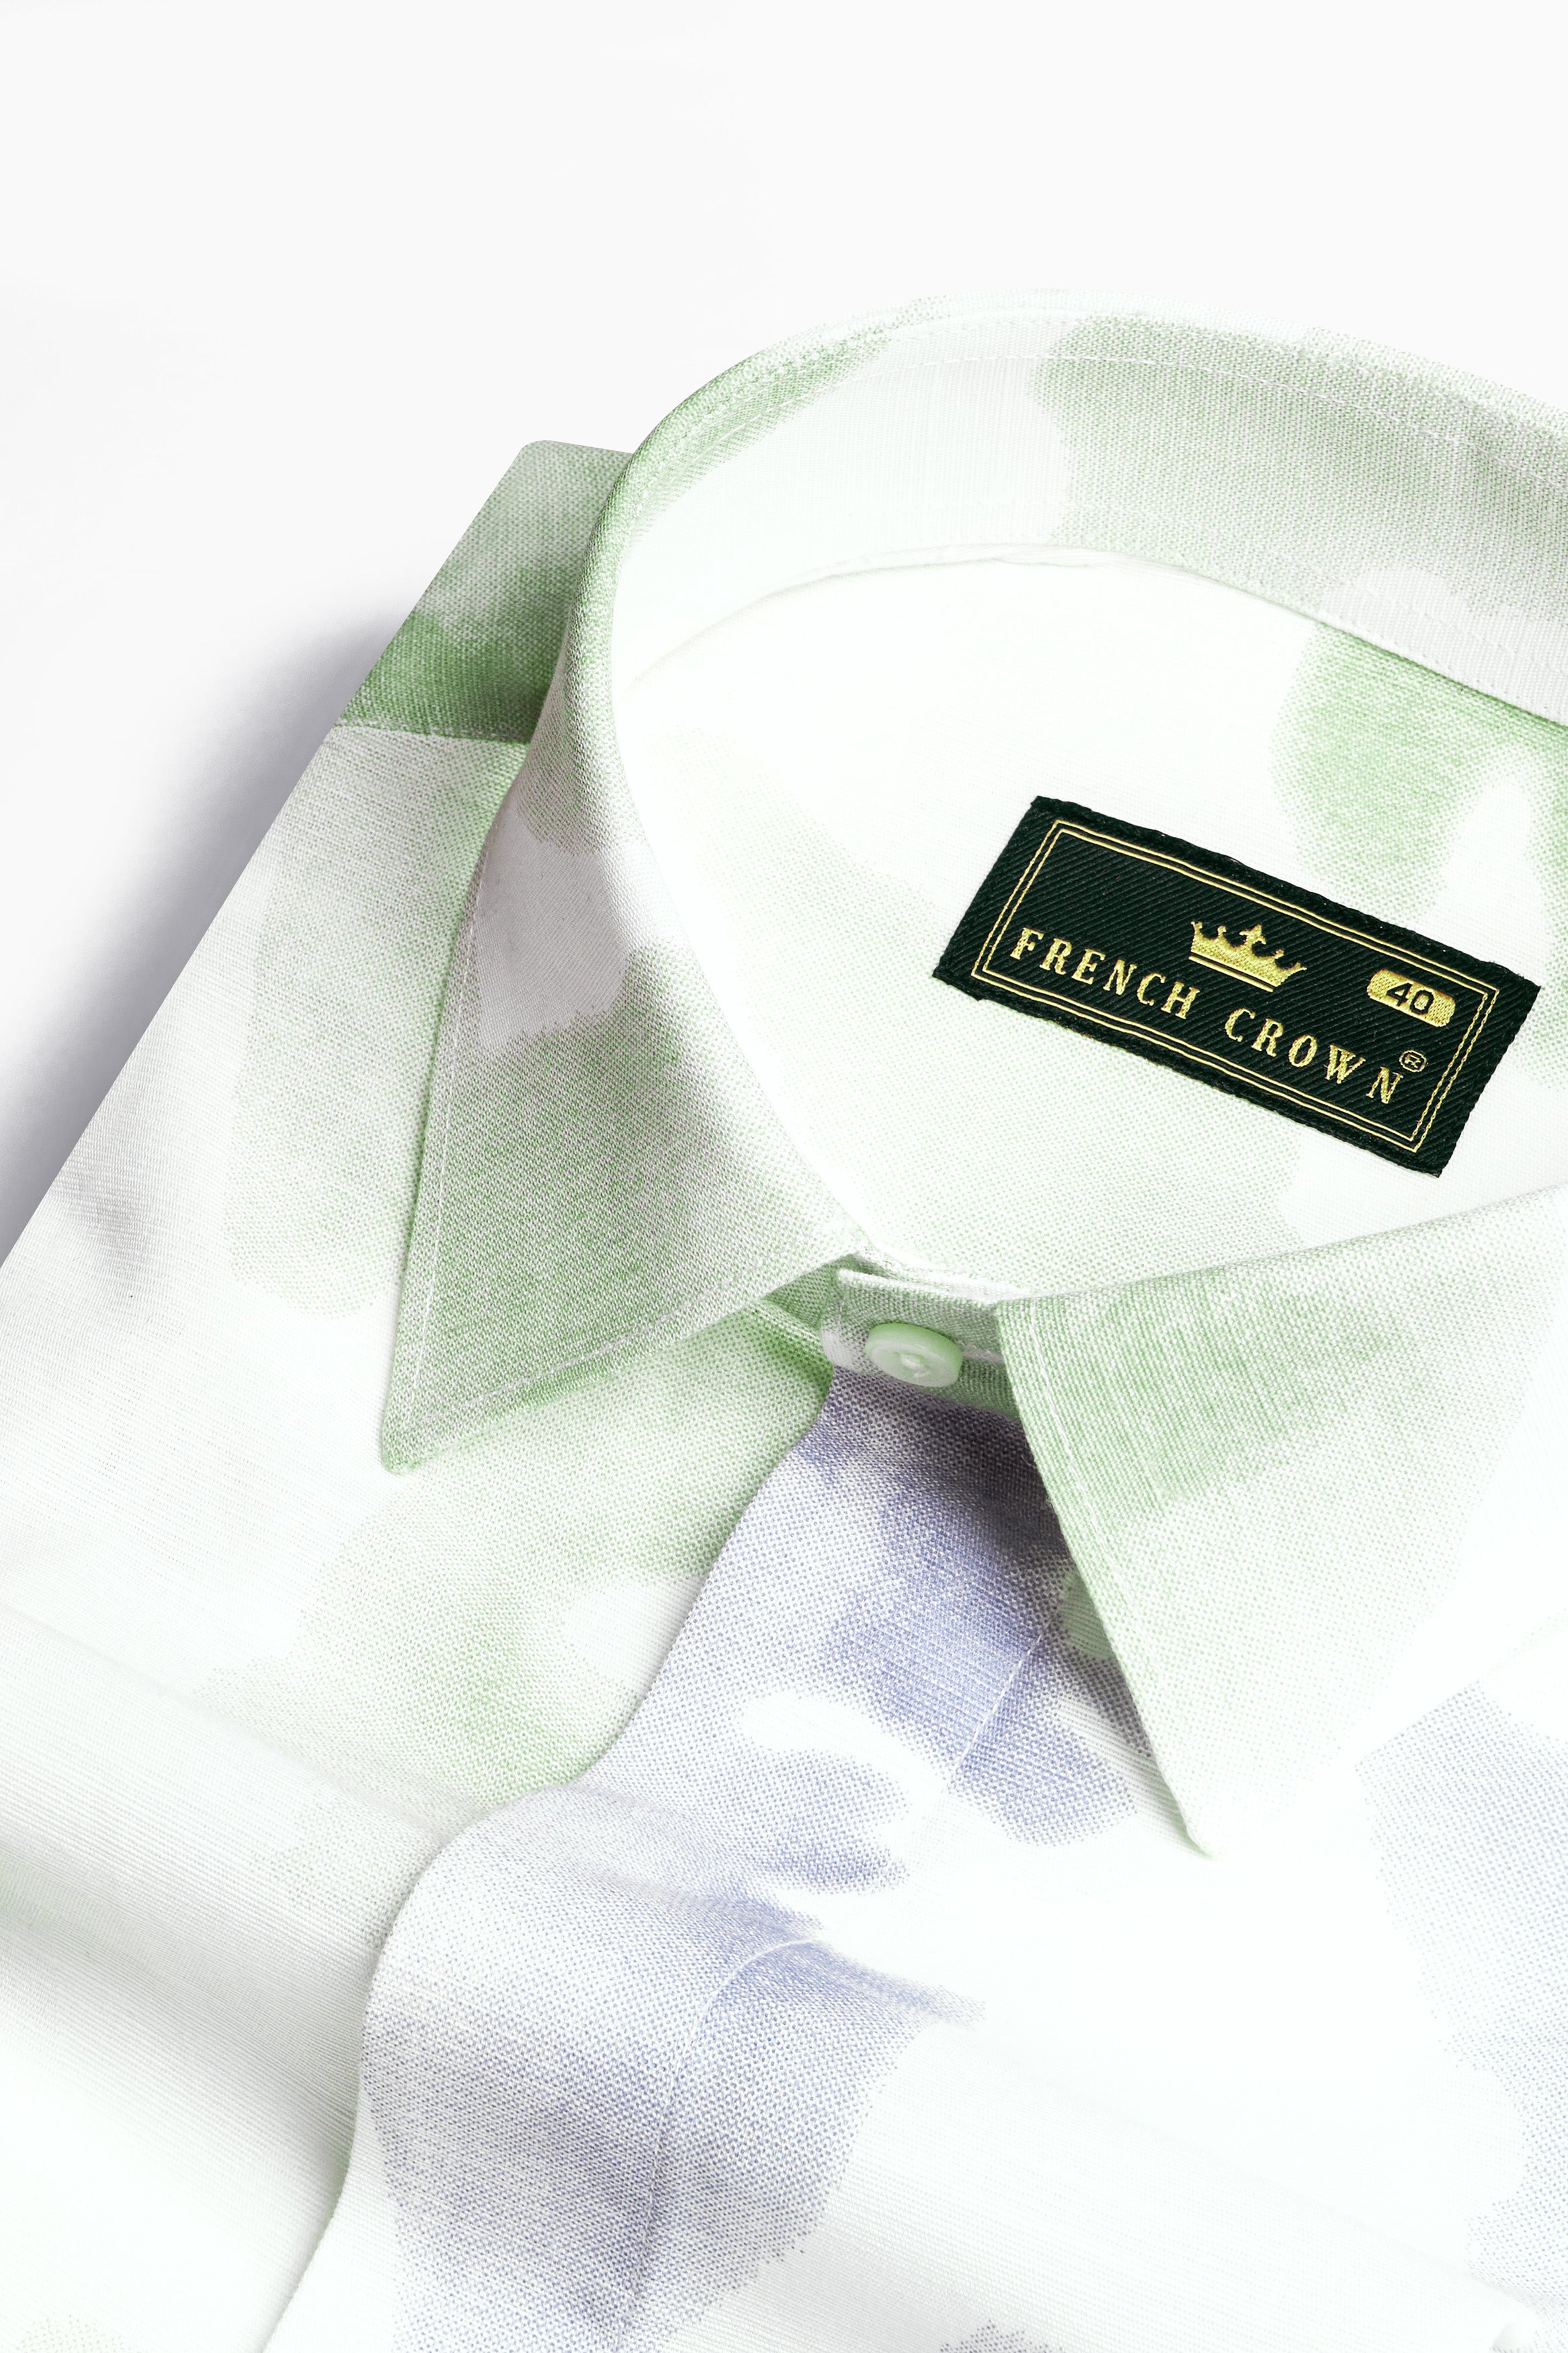 Celadon Green with White and Casper Blue Tie Dye Printed Luxurious Linen Shirt